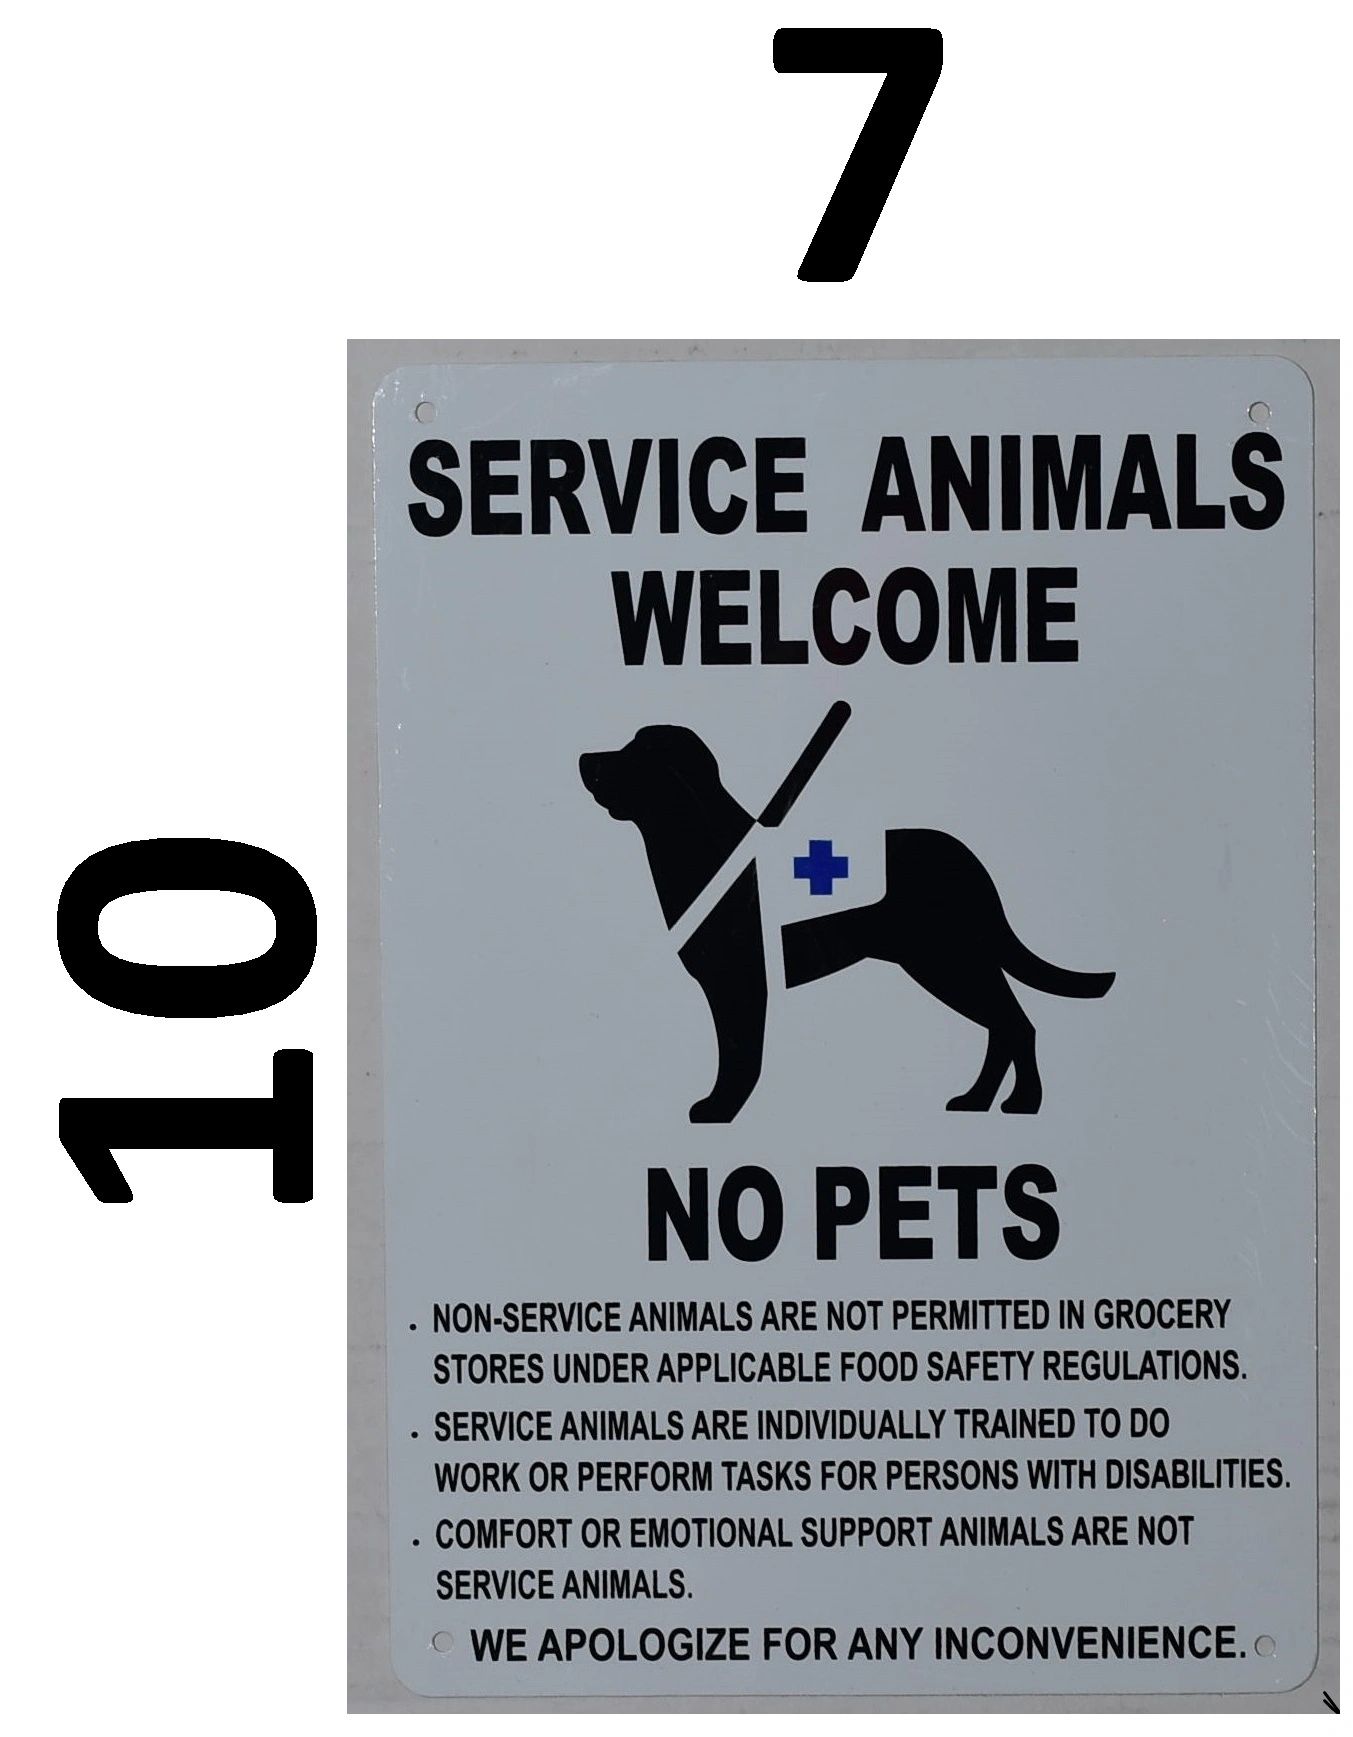 Made in USA 10x7 inch Aluminum This is A Non-Smoking and No Pet Facility Sign